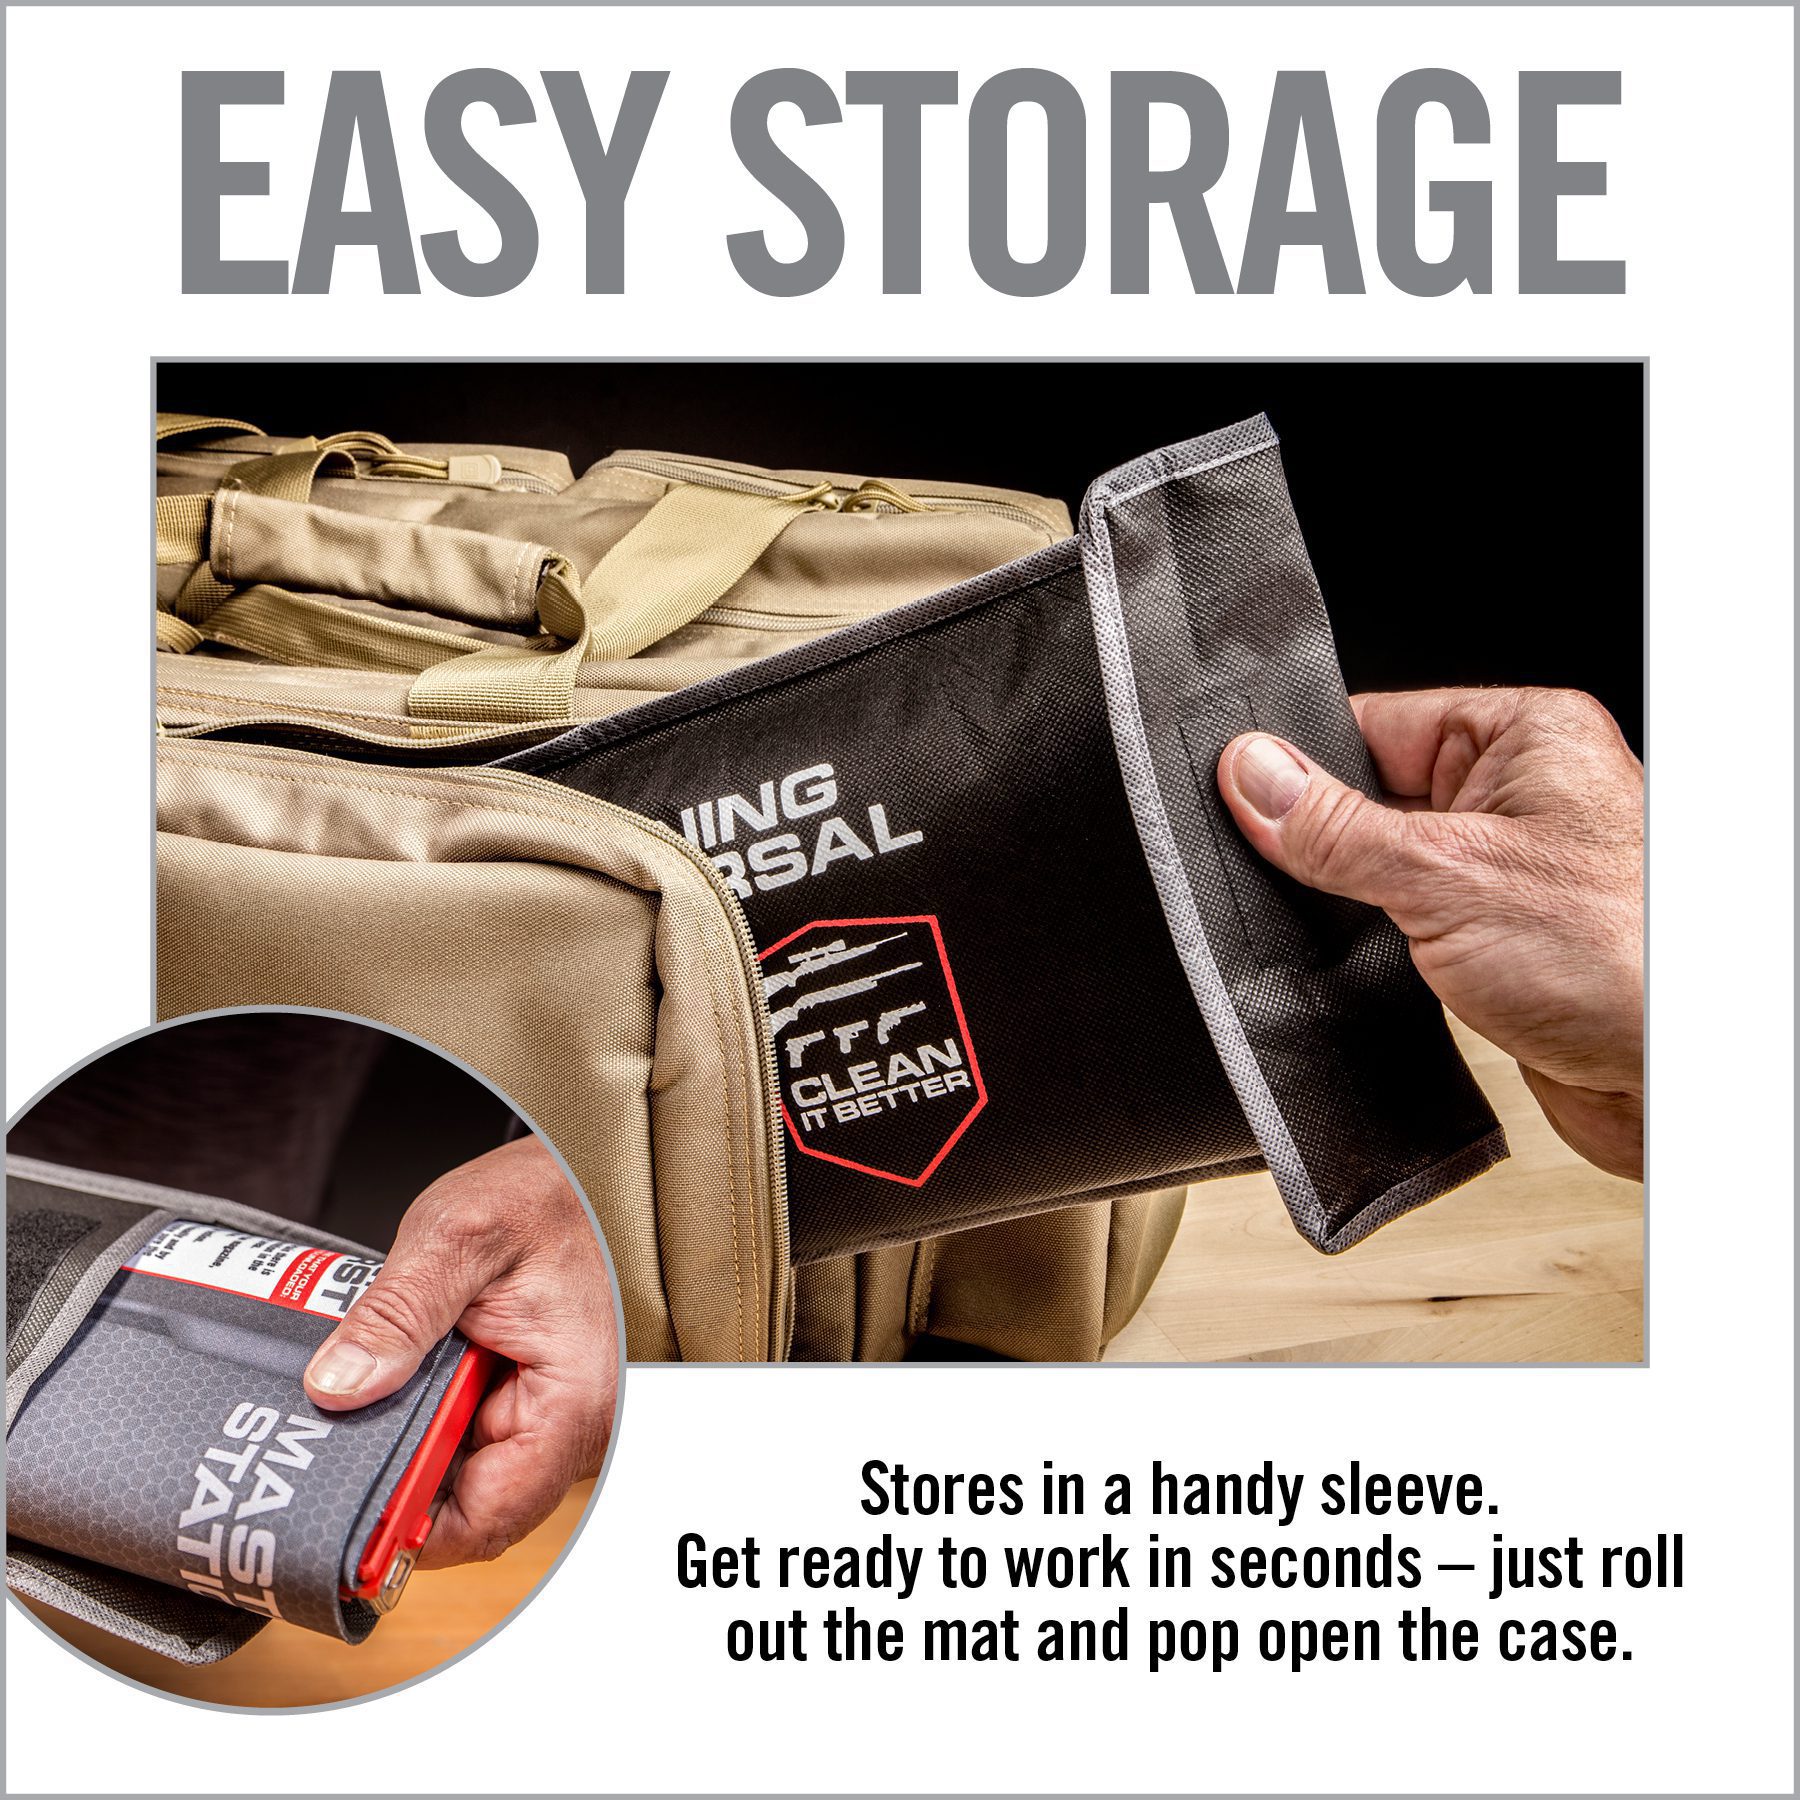 an advertisement for the easy storage store